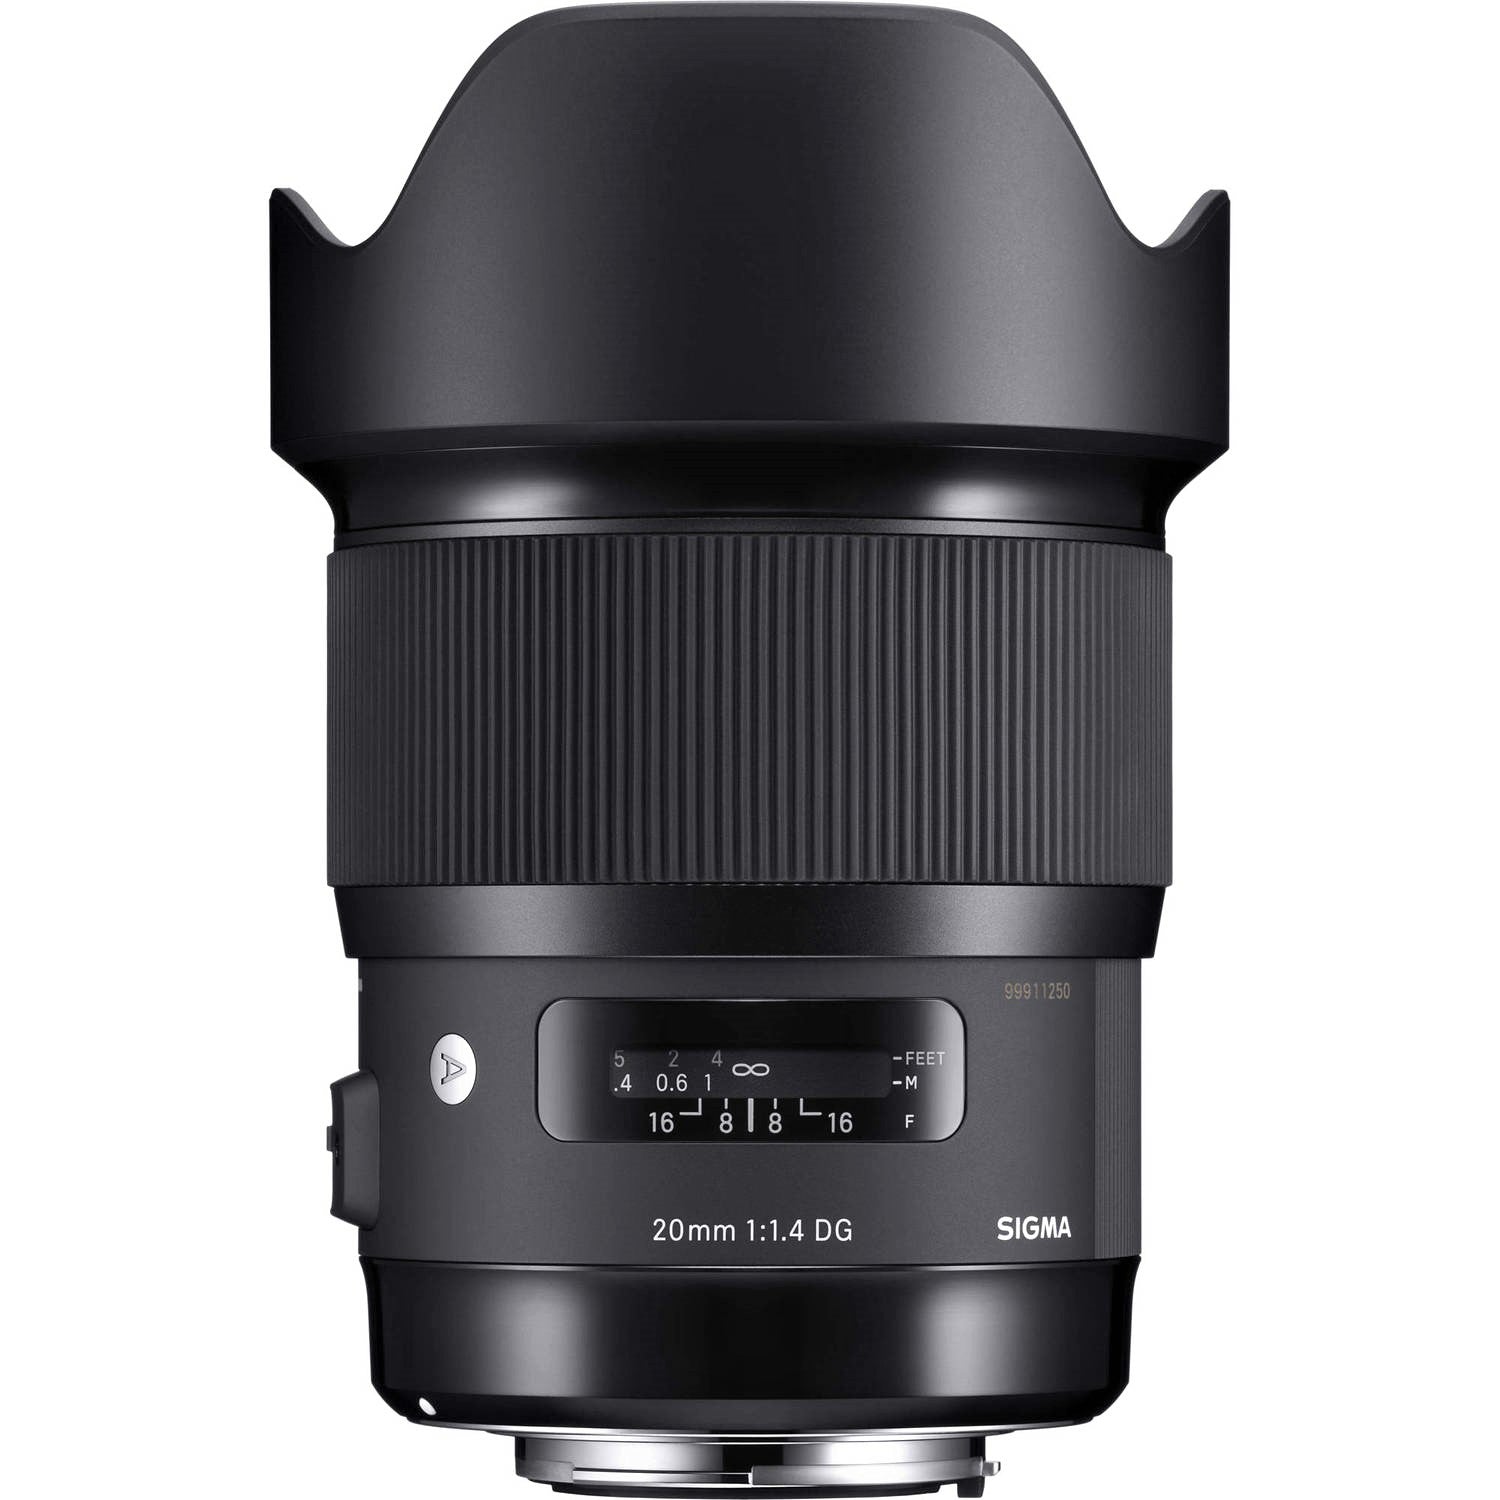 Sigma 20mm F1.4 DG HSM Art Lens for Sigma SA with Attached Lens Hood on the Top